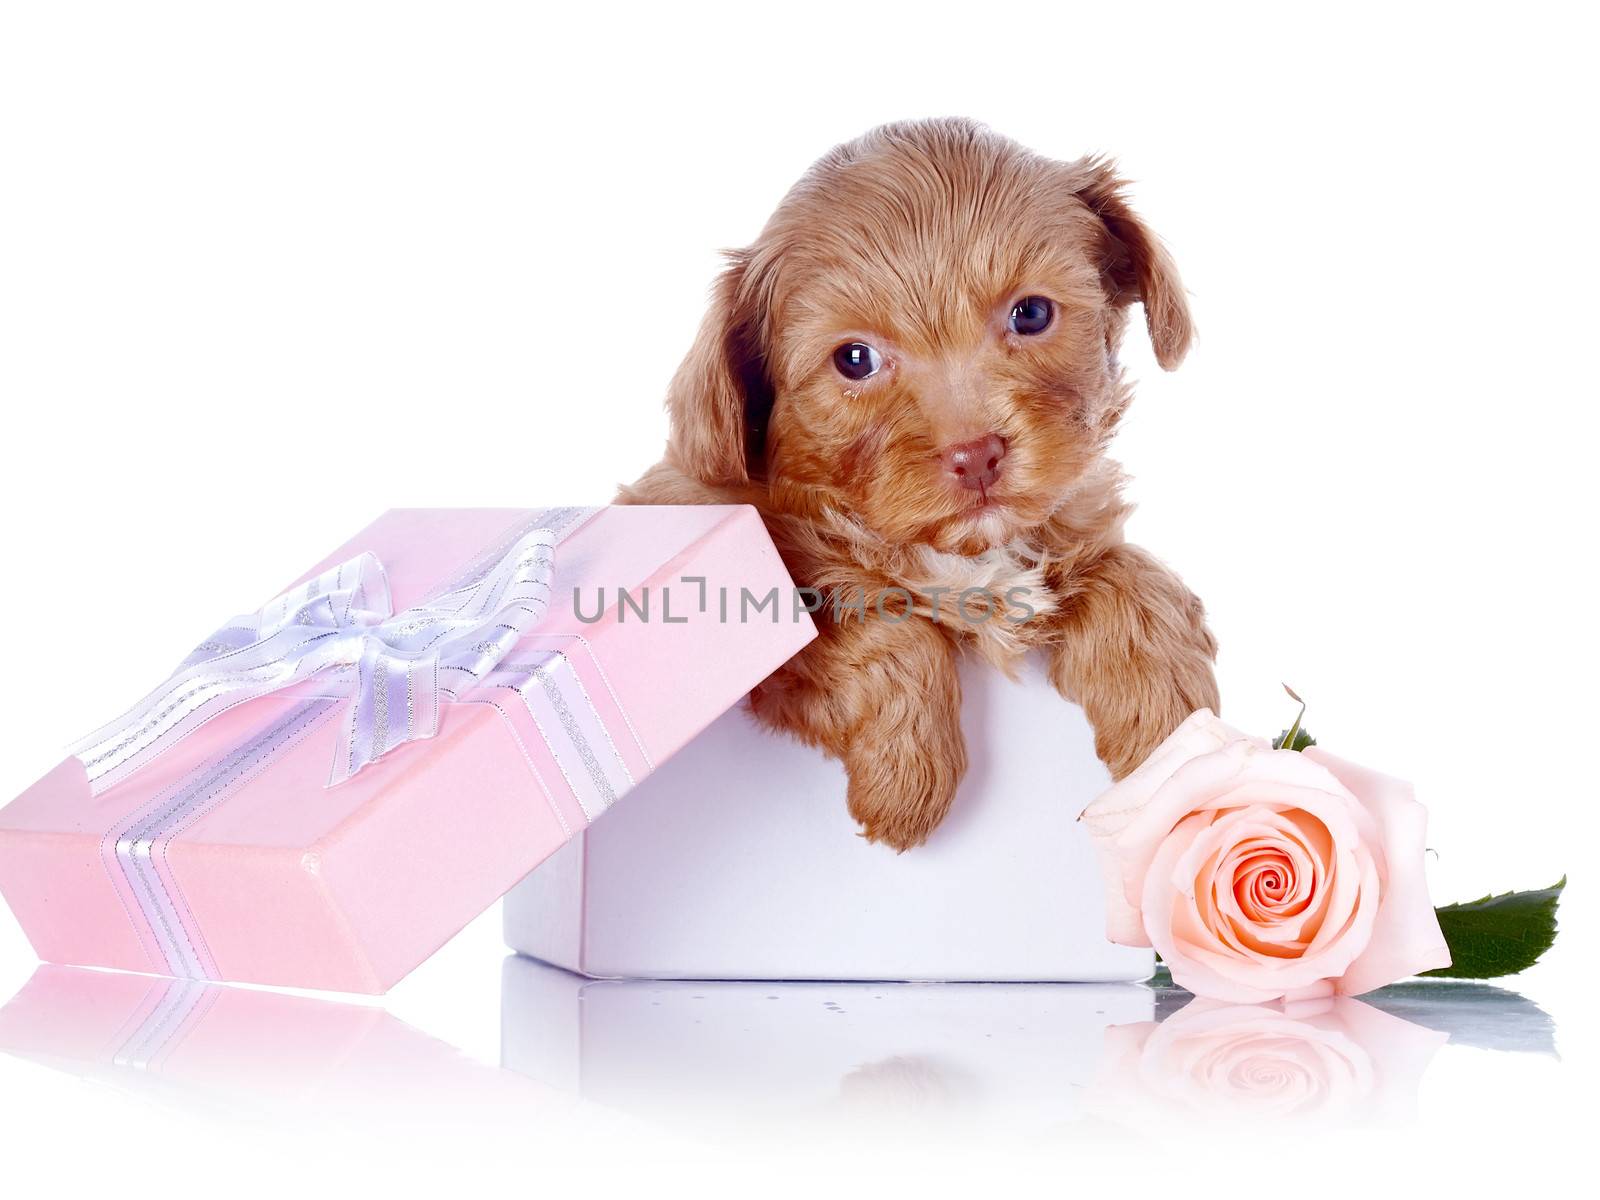 Puppy in a gift box and a rose. Puppy of a decorative doggie. Decorative dog. Puppy of the Petersburg orchid on a white background